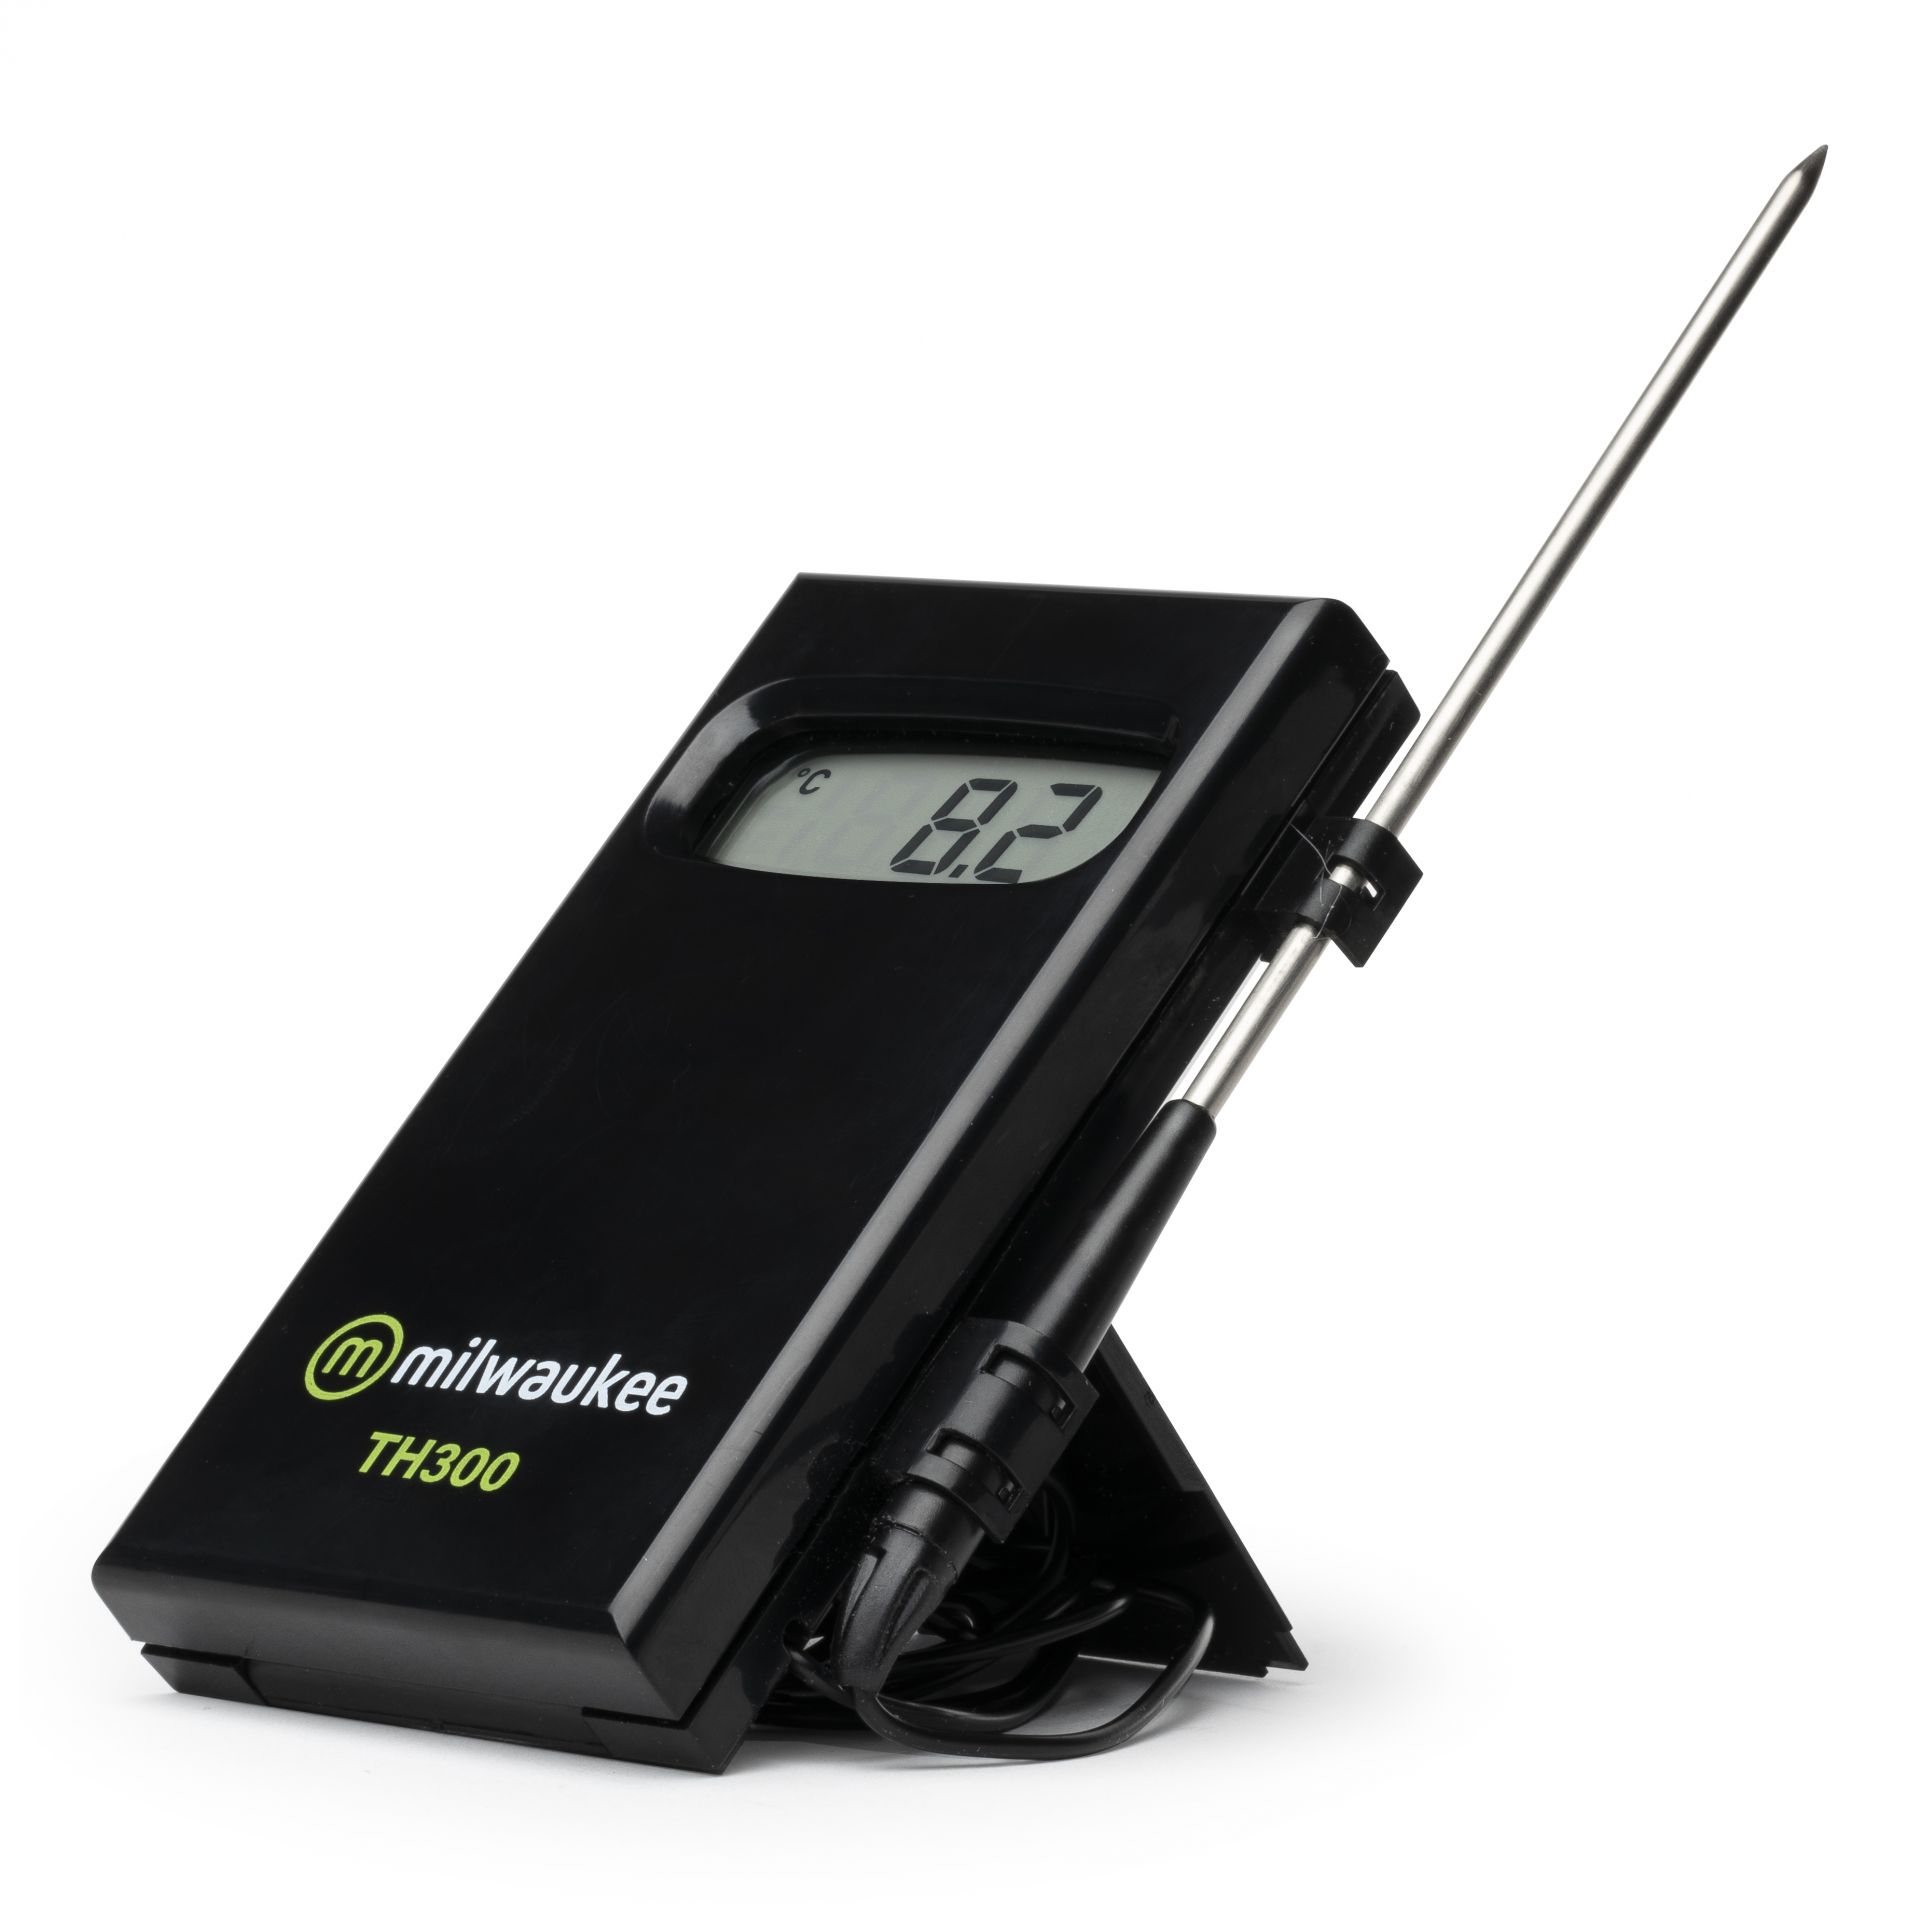 Milwaukee Digital Thermometer with Probe TH300